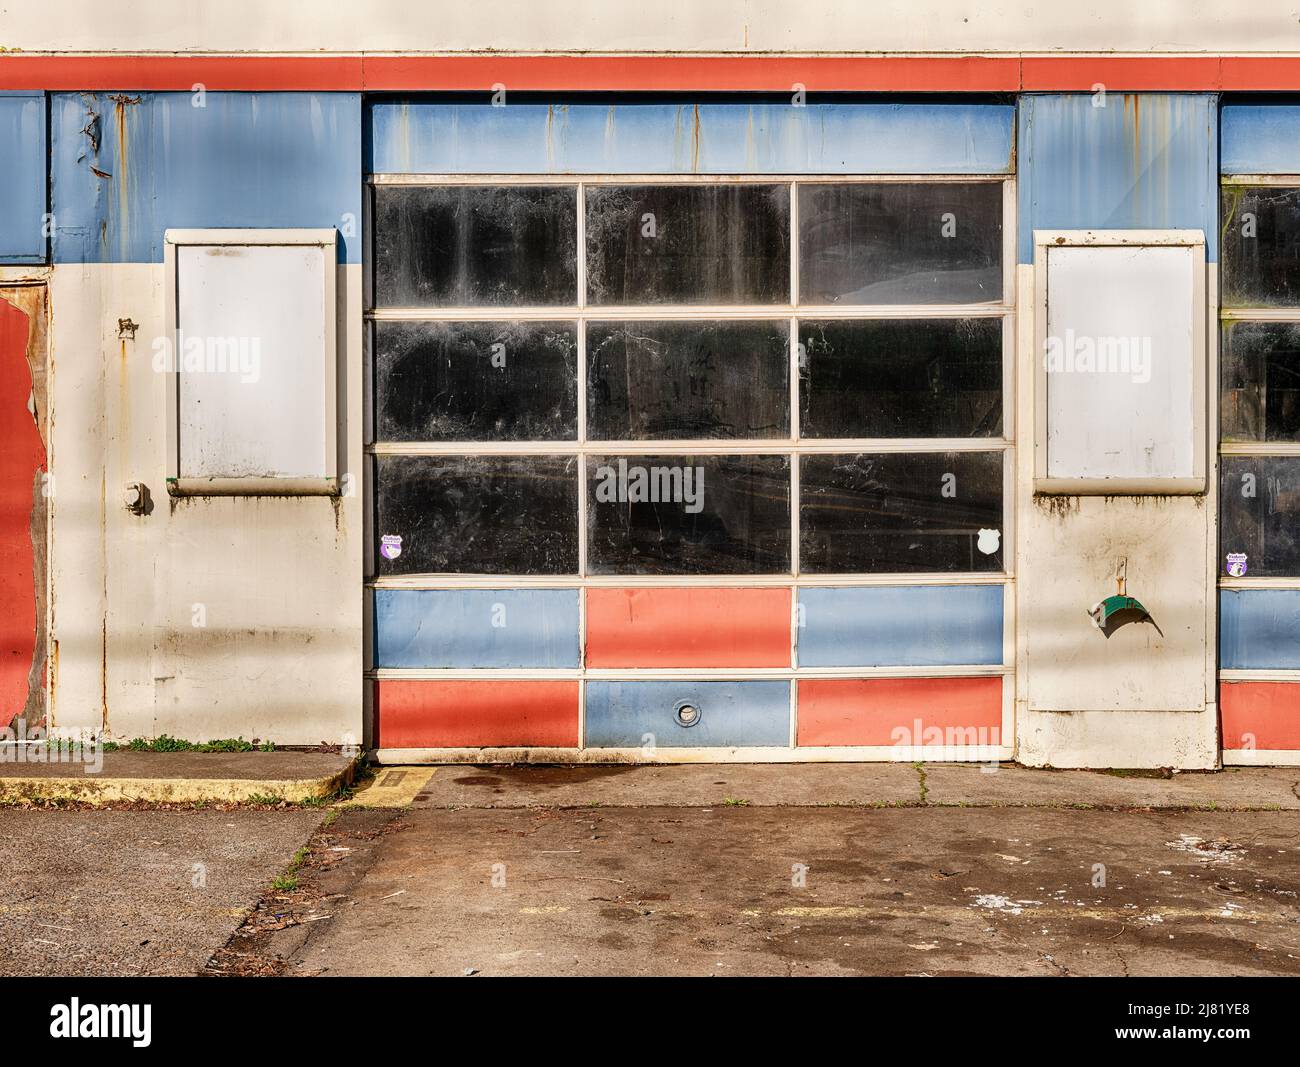 Service station is closed but still shows faded blue and red garage doors. Stock Photo